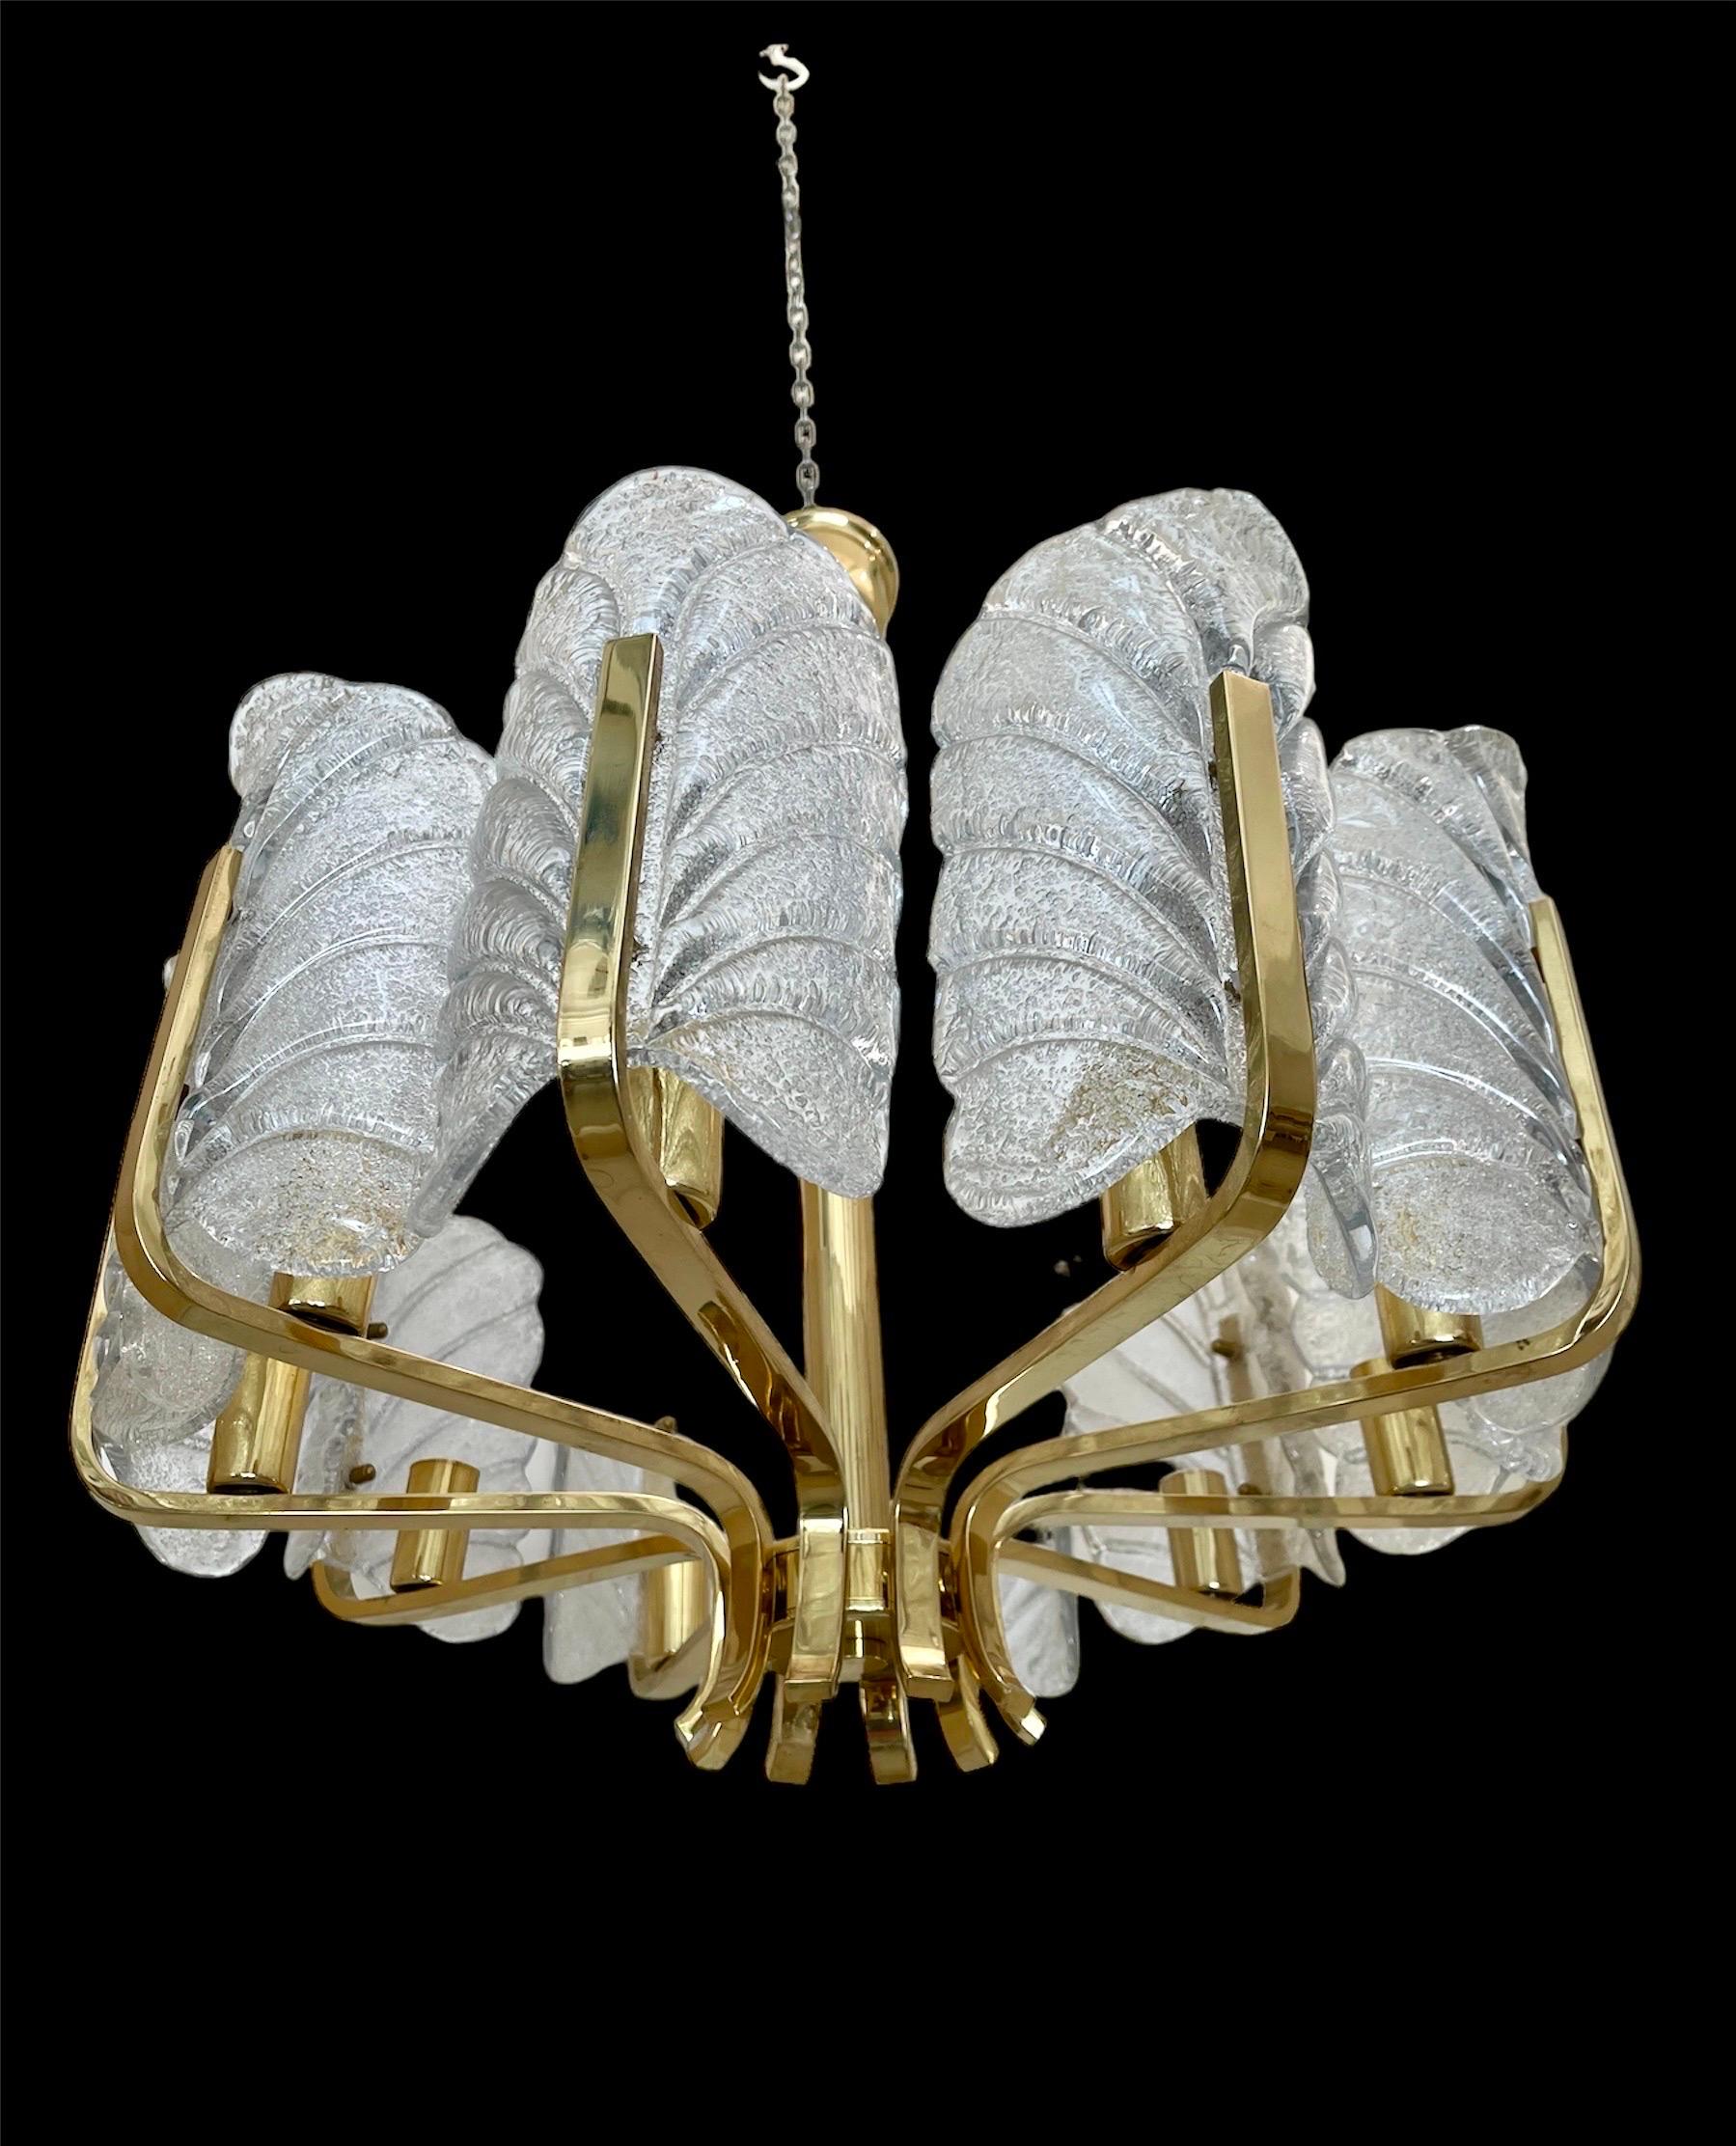 Carl Fagerlund by Orrifors Chandelier with glass of murano in frosted glass design. Very rare model of glass with a golden brass structure. An iconic lamp of danish design, a unique element for an atmosphere of great luxury.

discount shipping to